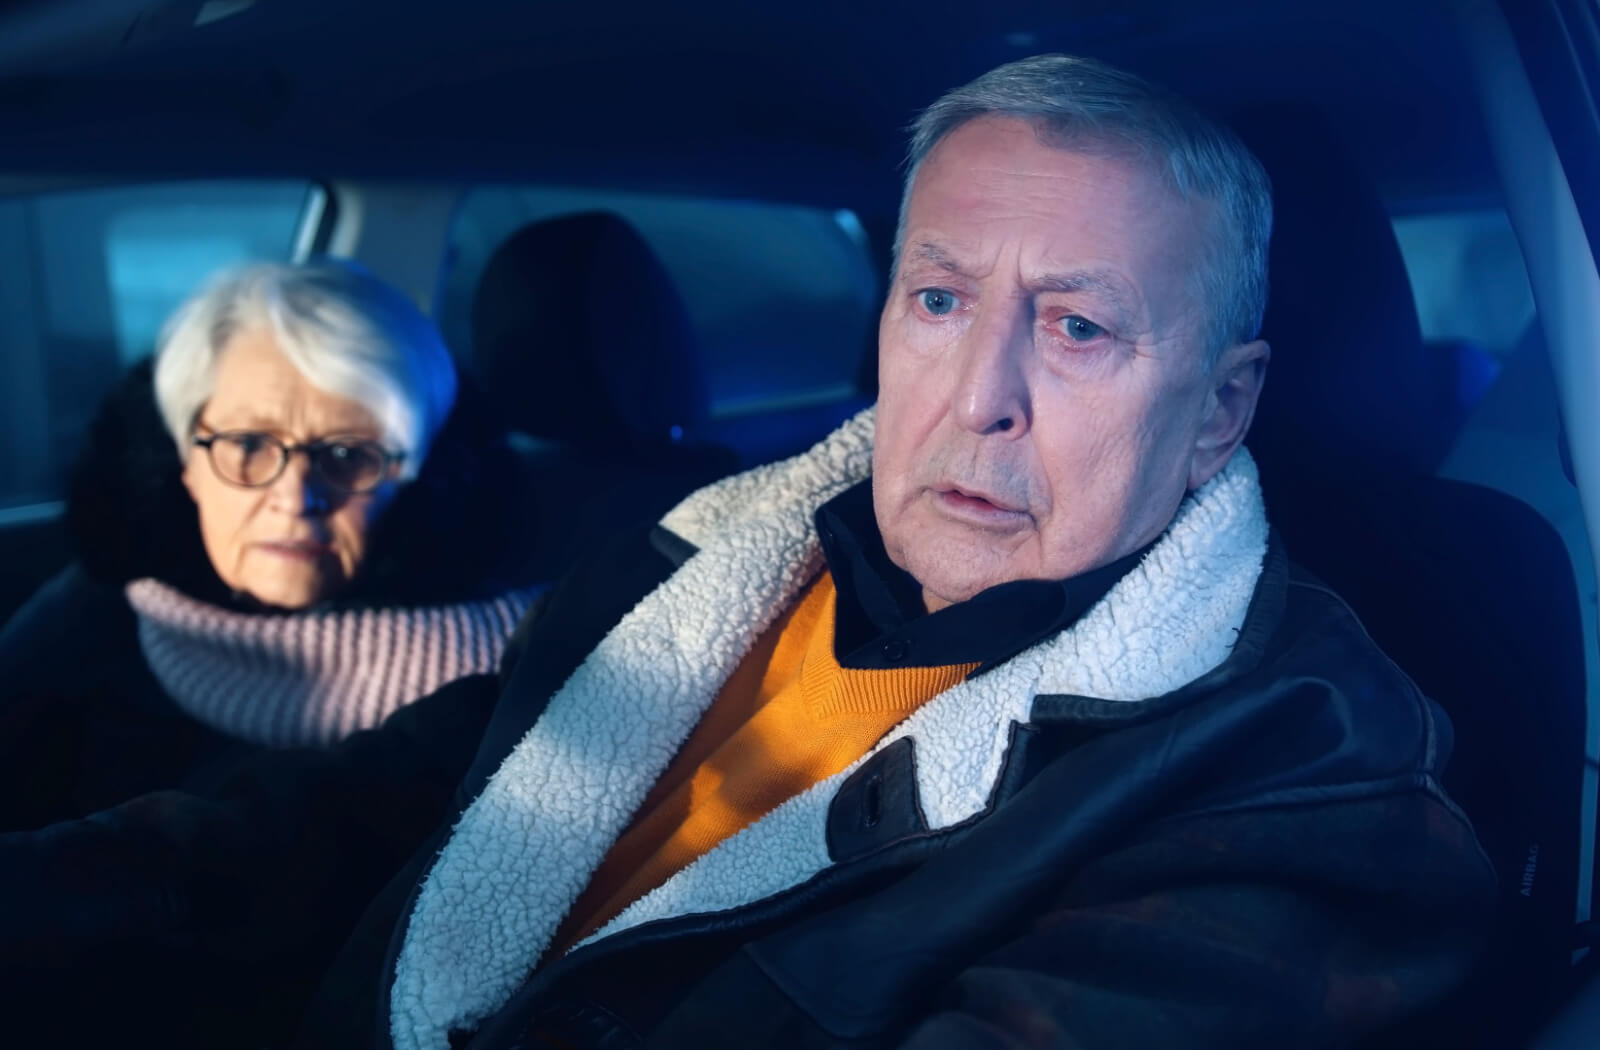 A senior man in the driver's seat of a car with a senior woman in the passenger seat, both with a concerned look on their faces